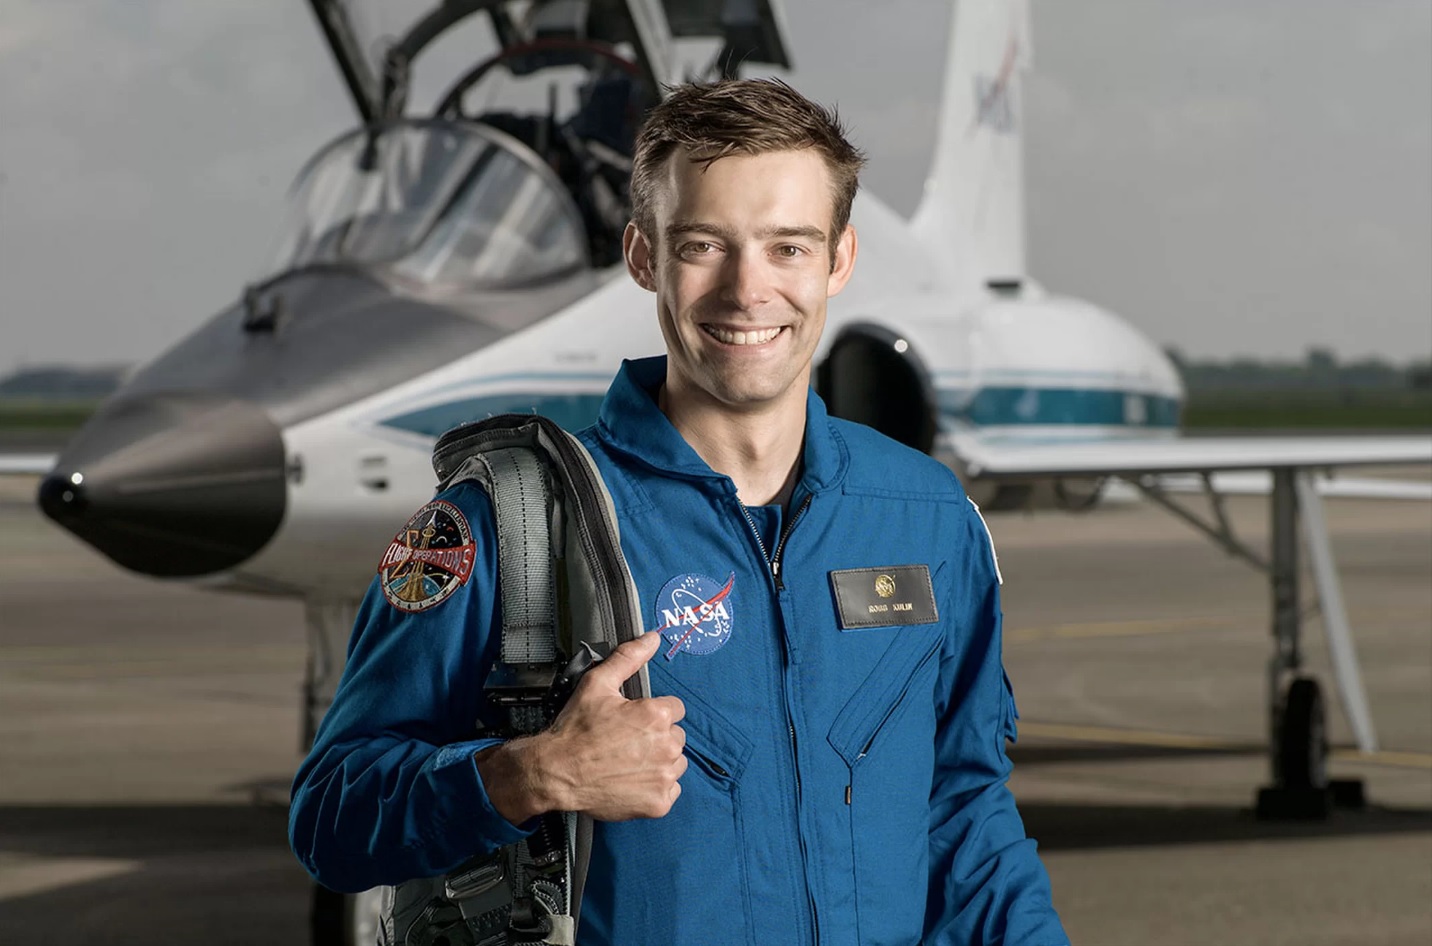 For the first time in 50 years potential NASA astronaut refused training